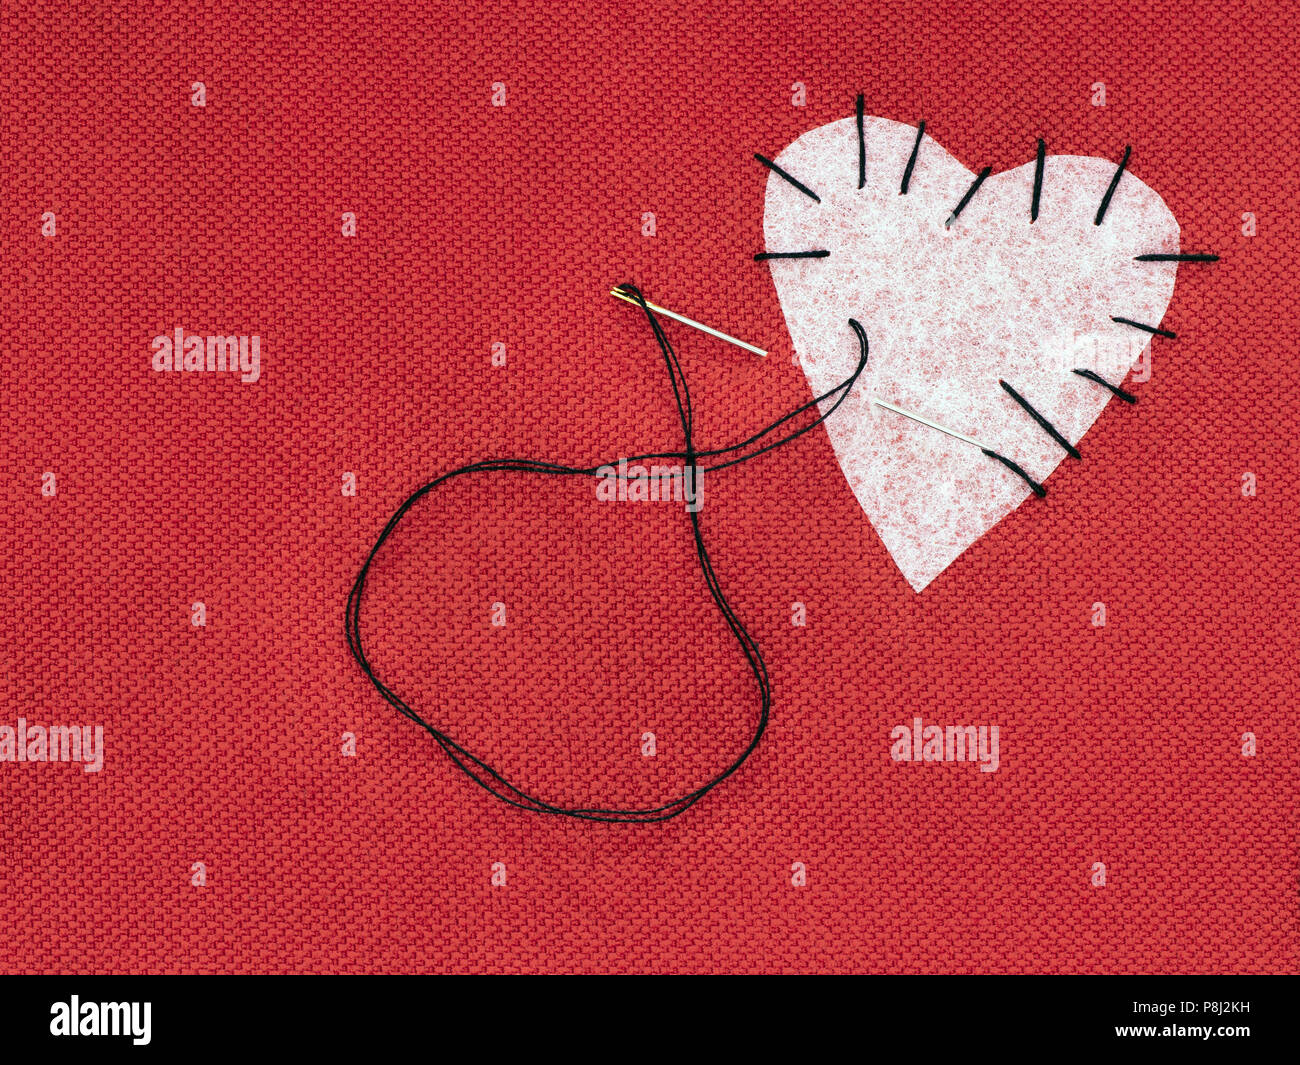 Fabric heart red with white patch and black sewing thread. Mend broken heart concept. Stock Photo